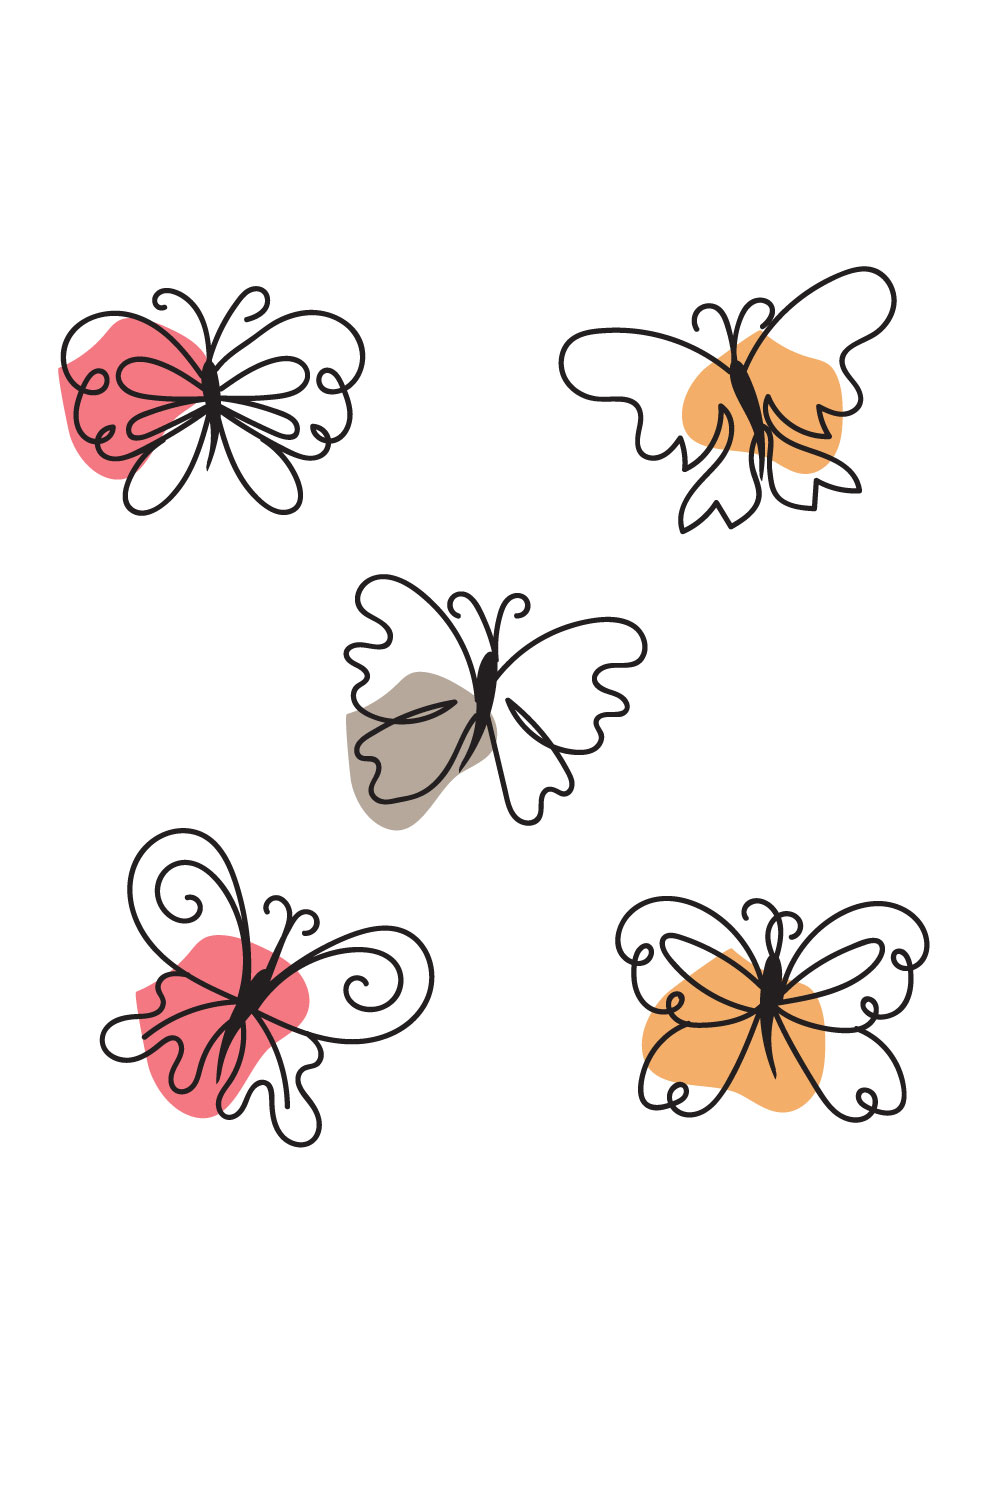 Group of four different colored butterflies on a white background.